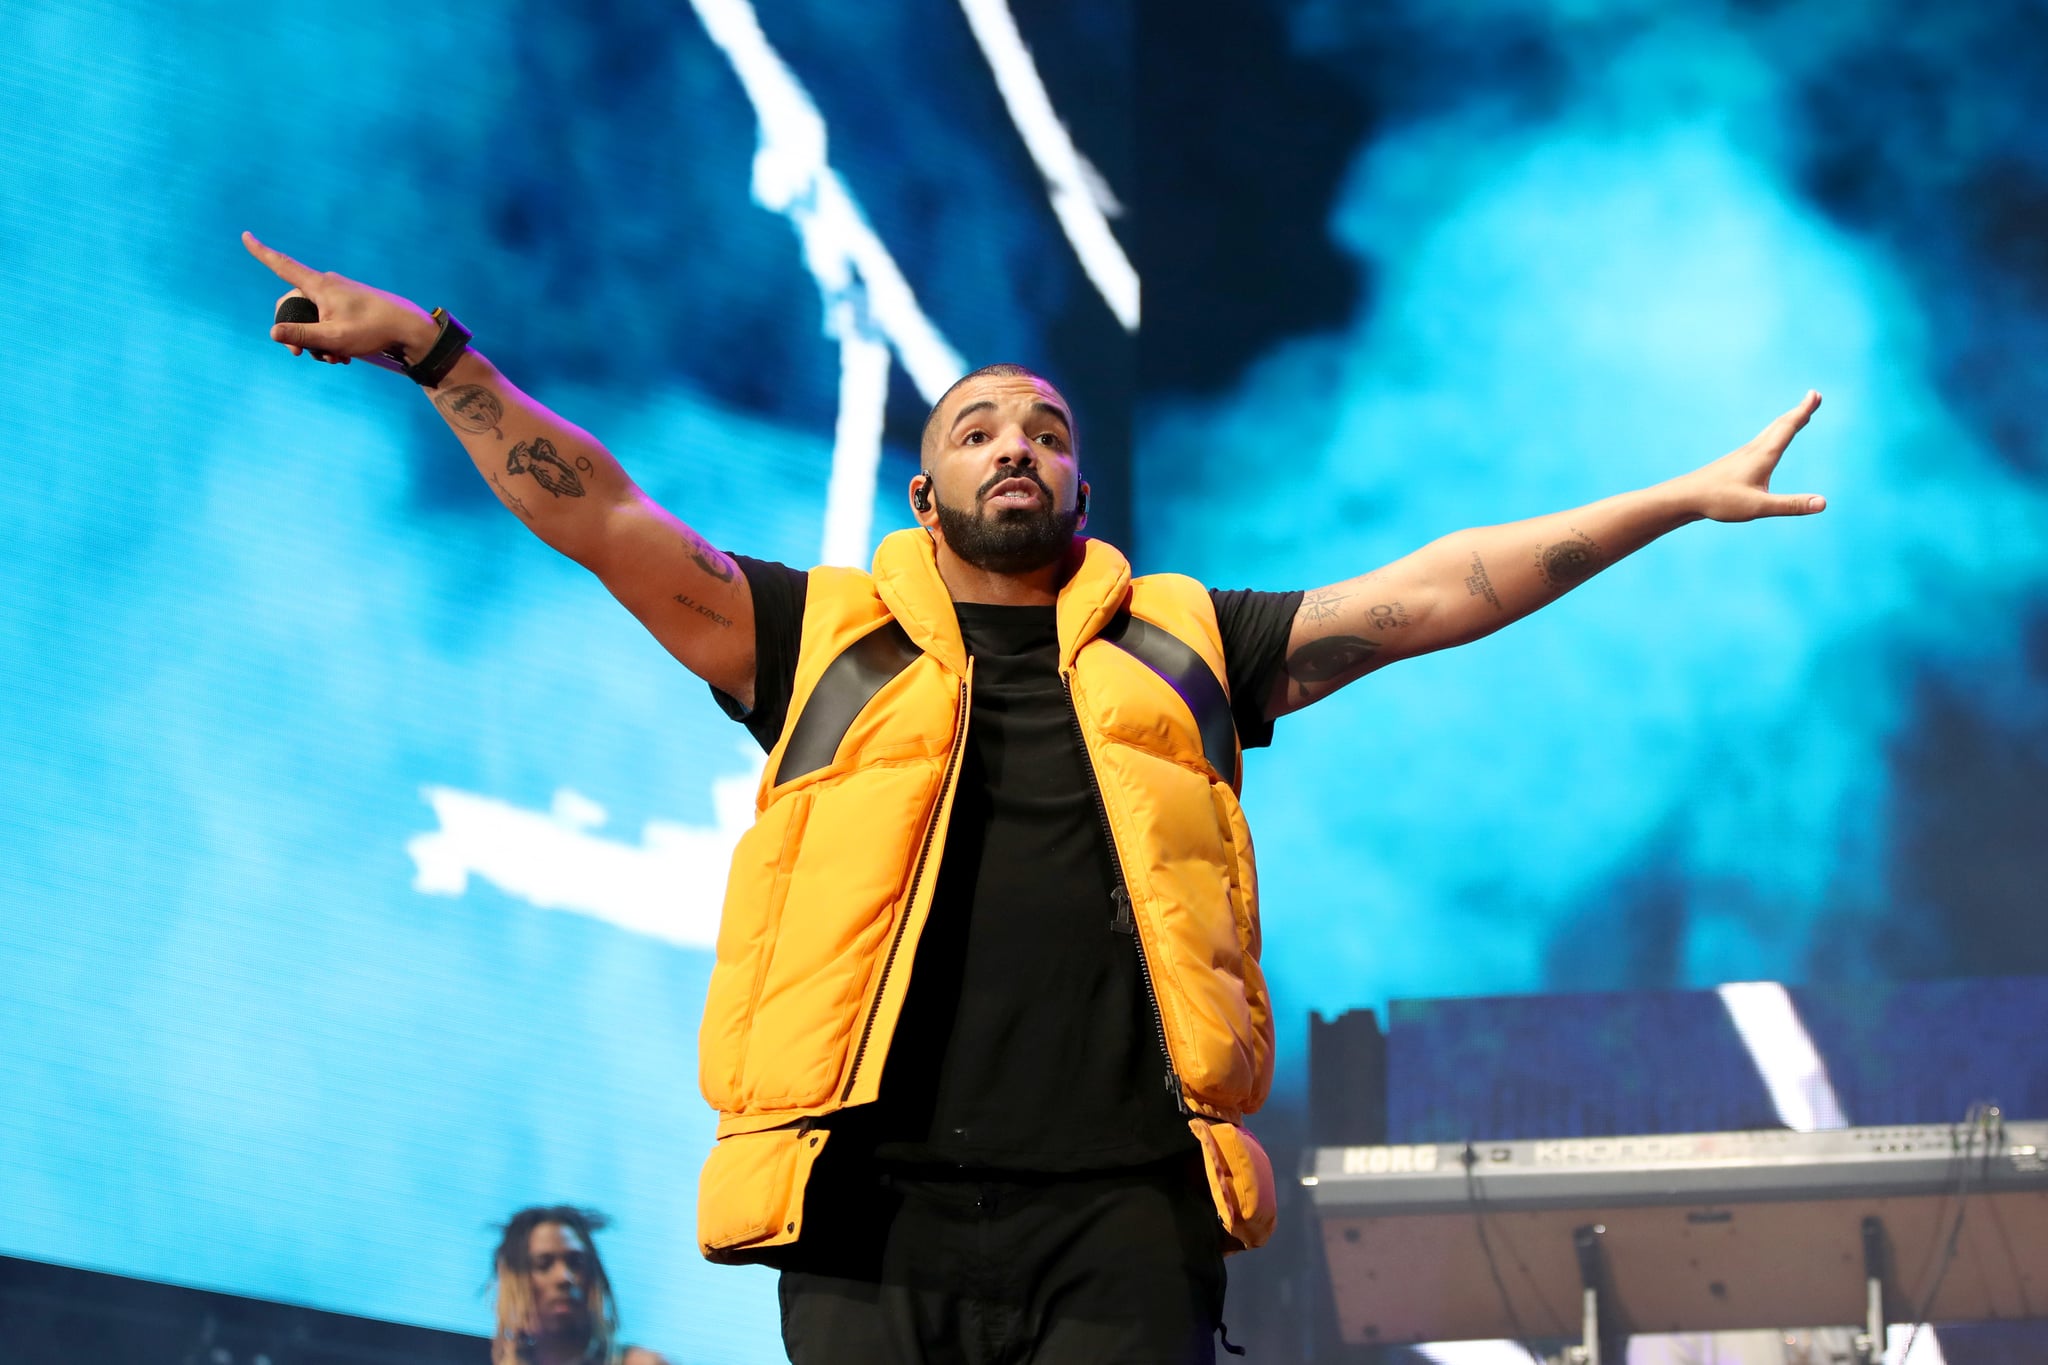 INDIO, CA - APRIL 15:  Drake performs on the Coachella stage during day 2 of the Coachella Valley Music And Arts Festival (Weekend 1) at the Empire Polo Club on April 15, 2017 in Indio, California.  (Photo by Christopher Polk/Getty Images for Coachella)